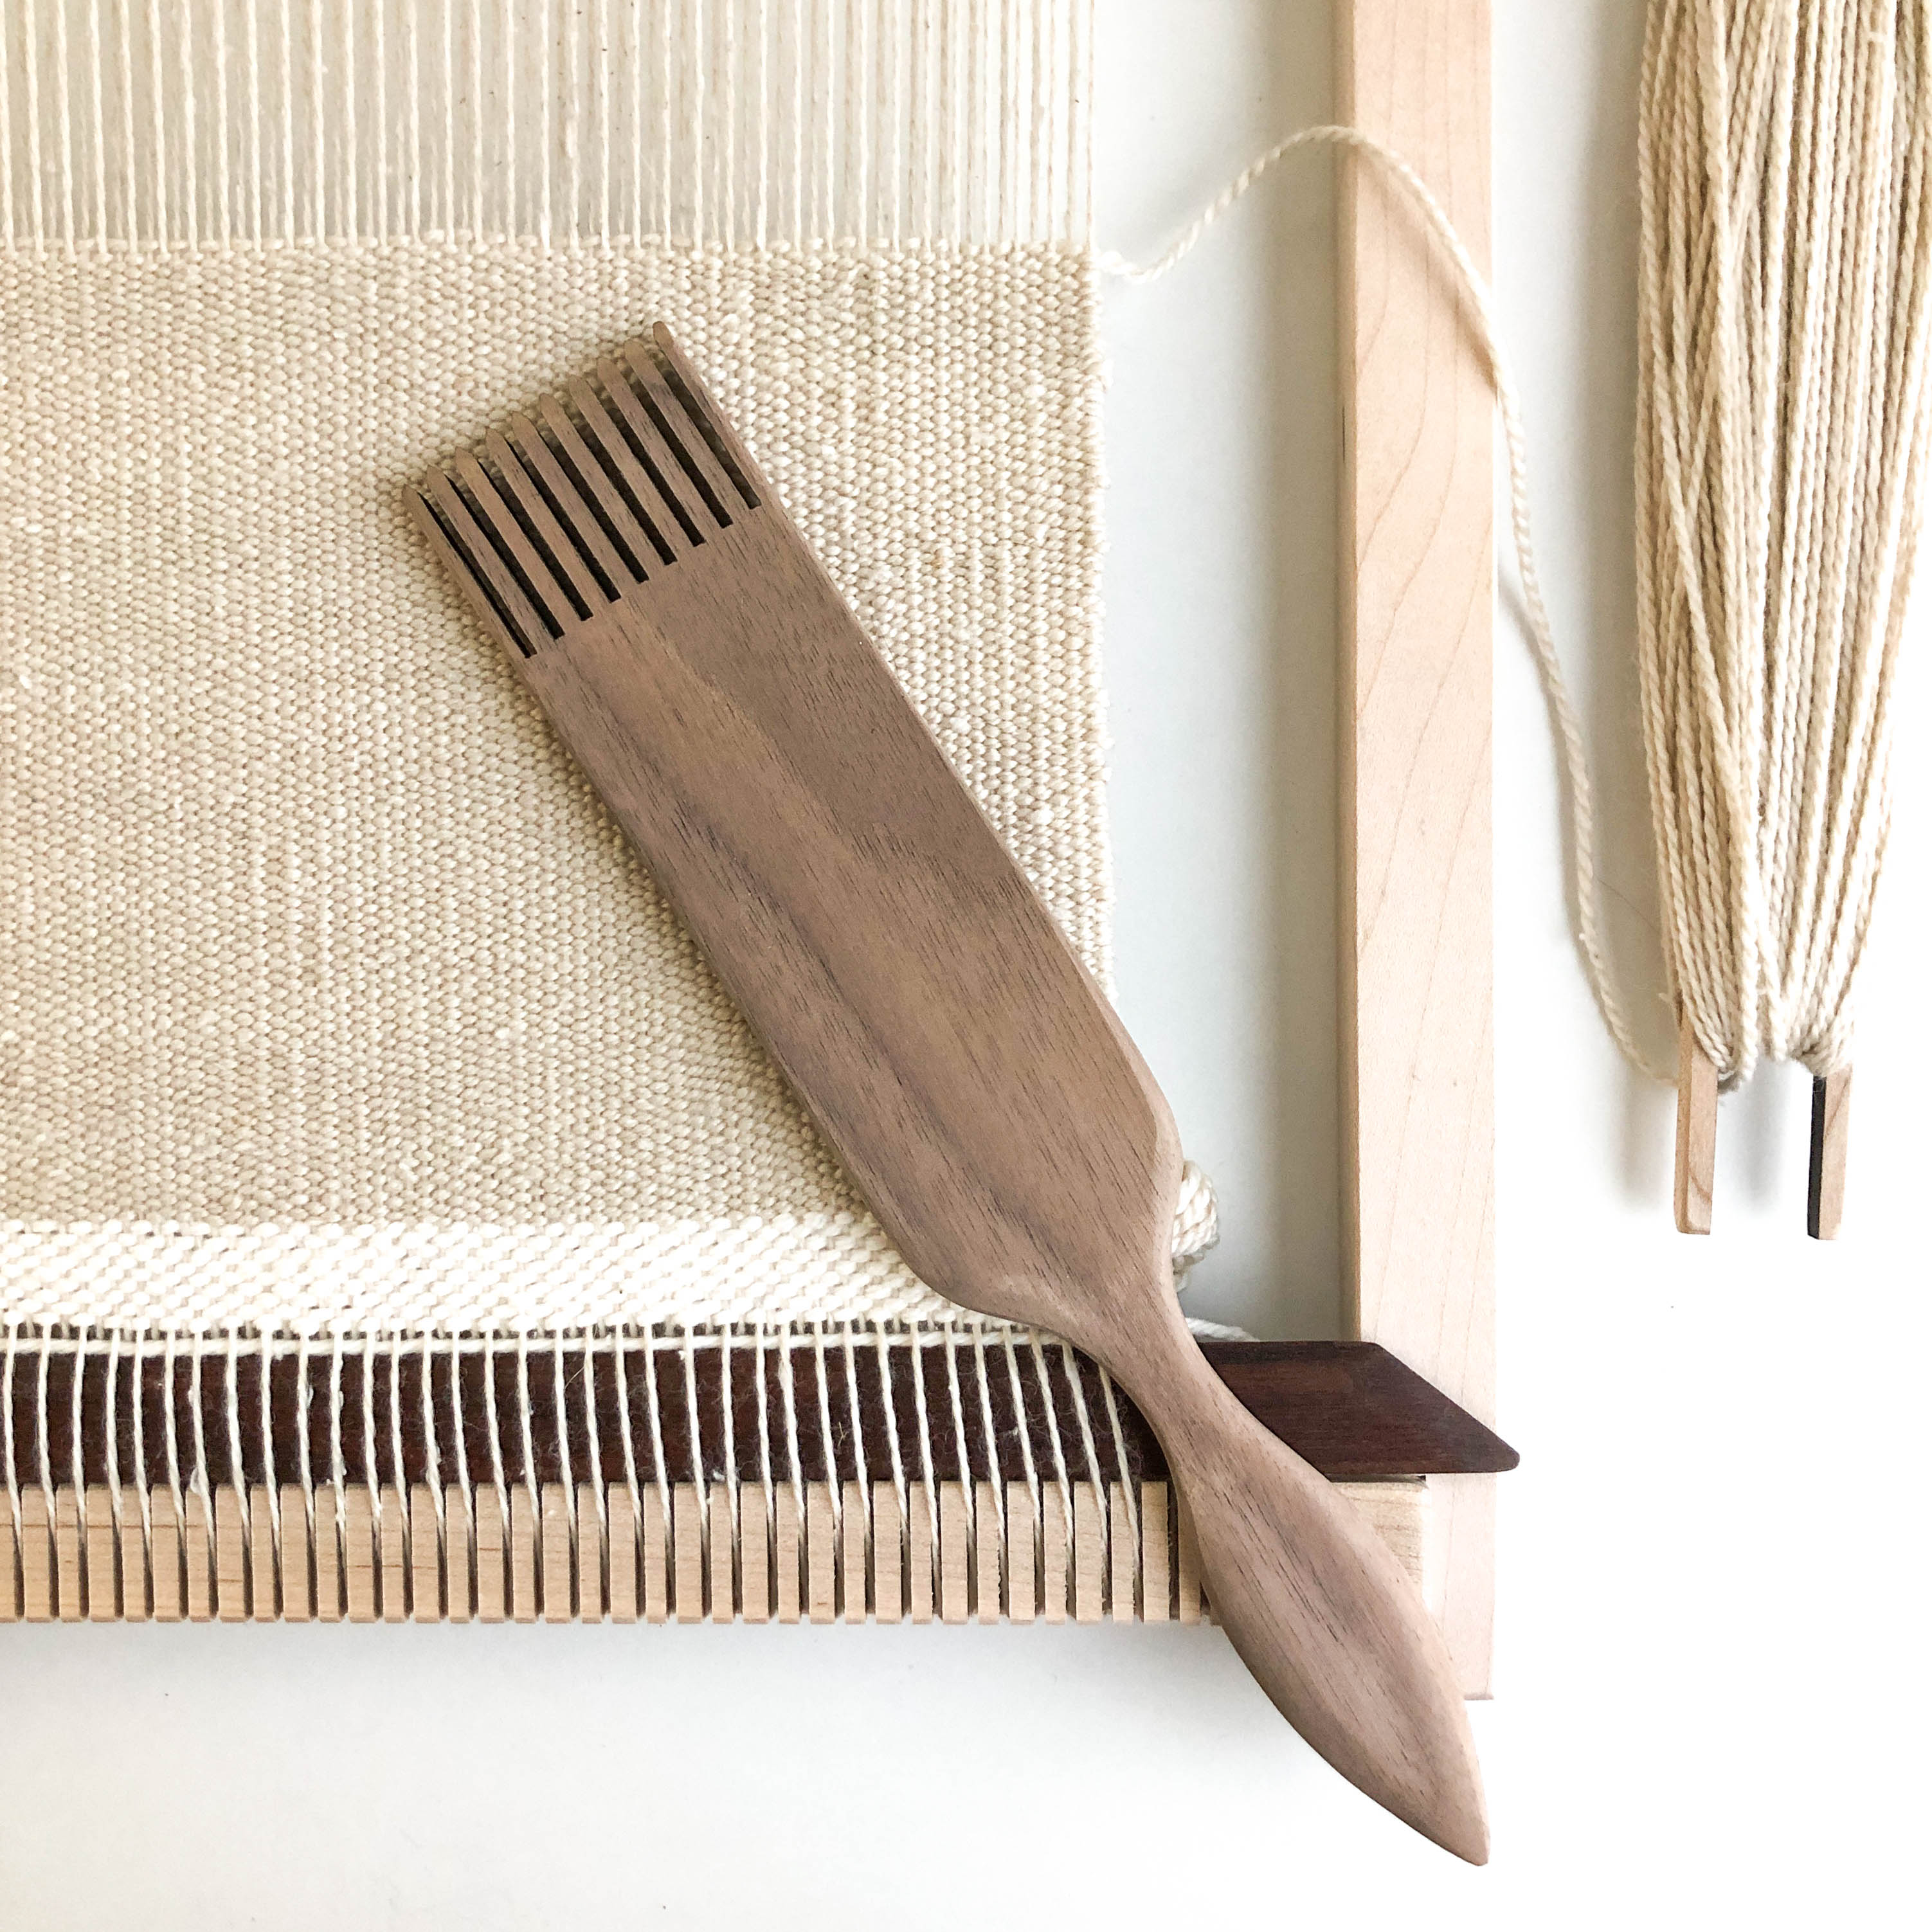 Flax & Twine 4" Comb / Beater in Walnut or Maple